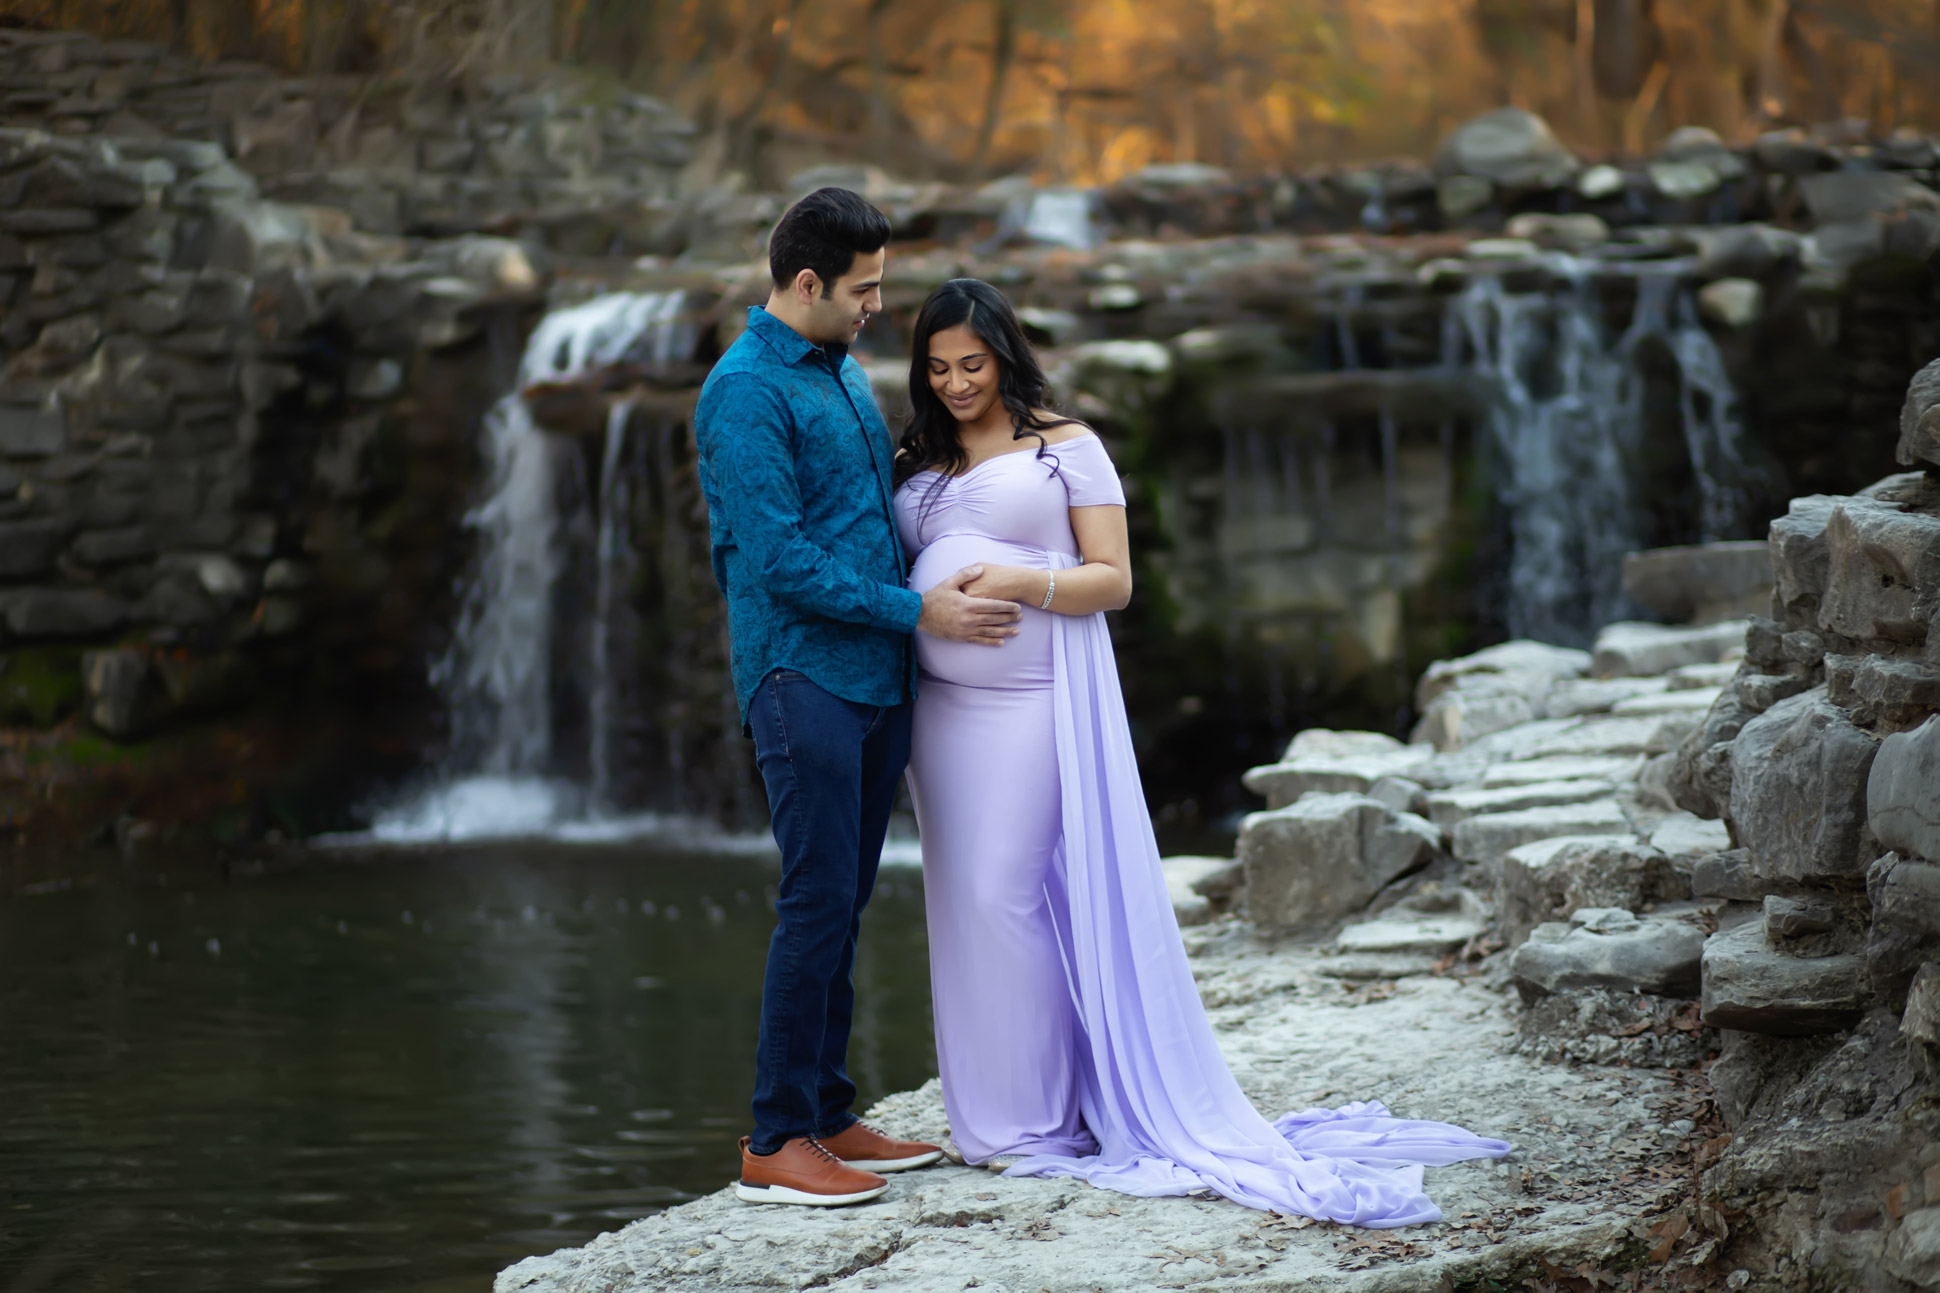 Dallas maternity photographer poses expectant couple in front of Prairie Creek Waterfall in Richardson Texas wearing shades of lavender and blue for their maternity photography session